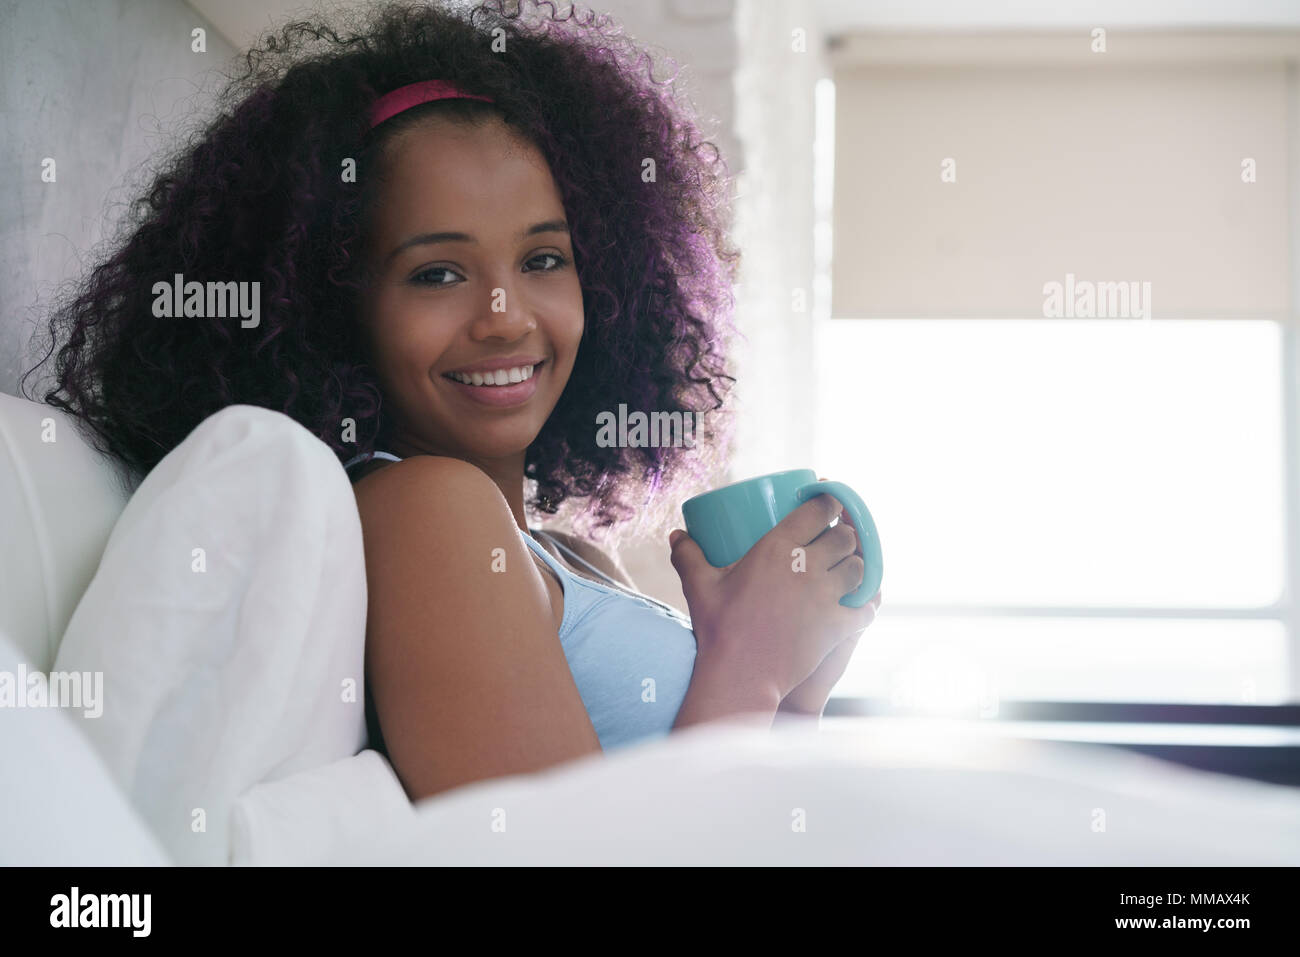 Girl Drinking Coffee In Bed Smiling At Camera Stock Photo